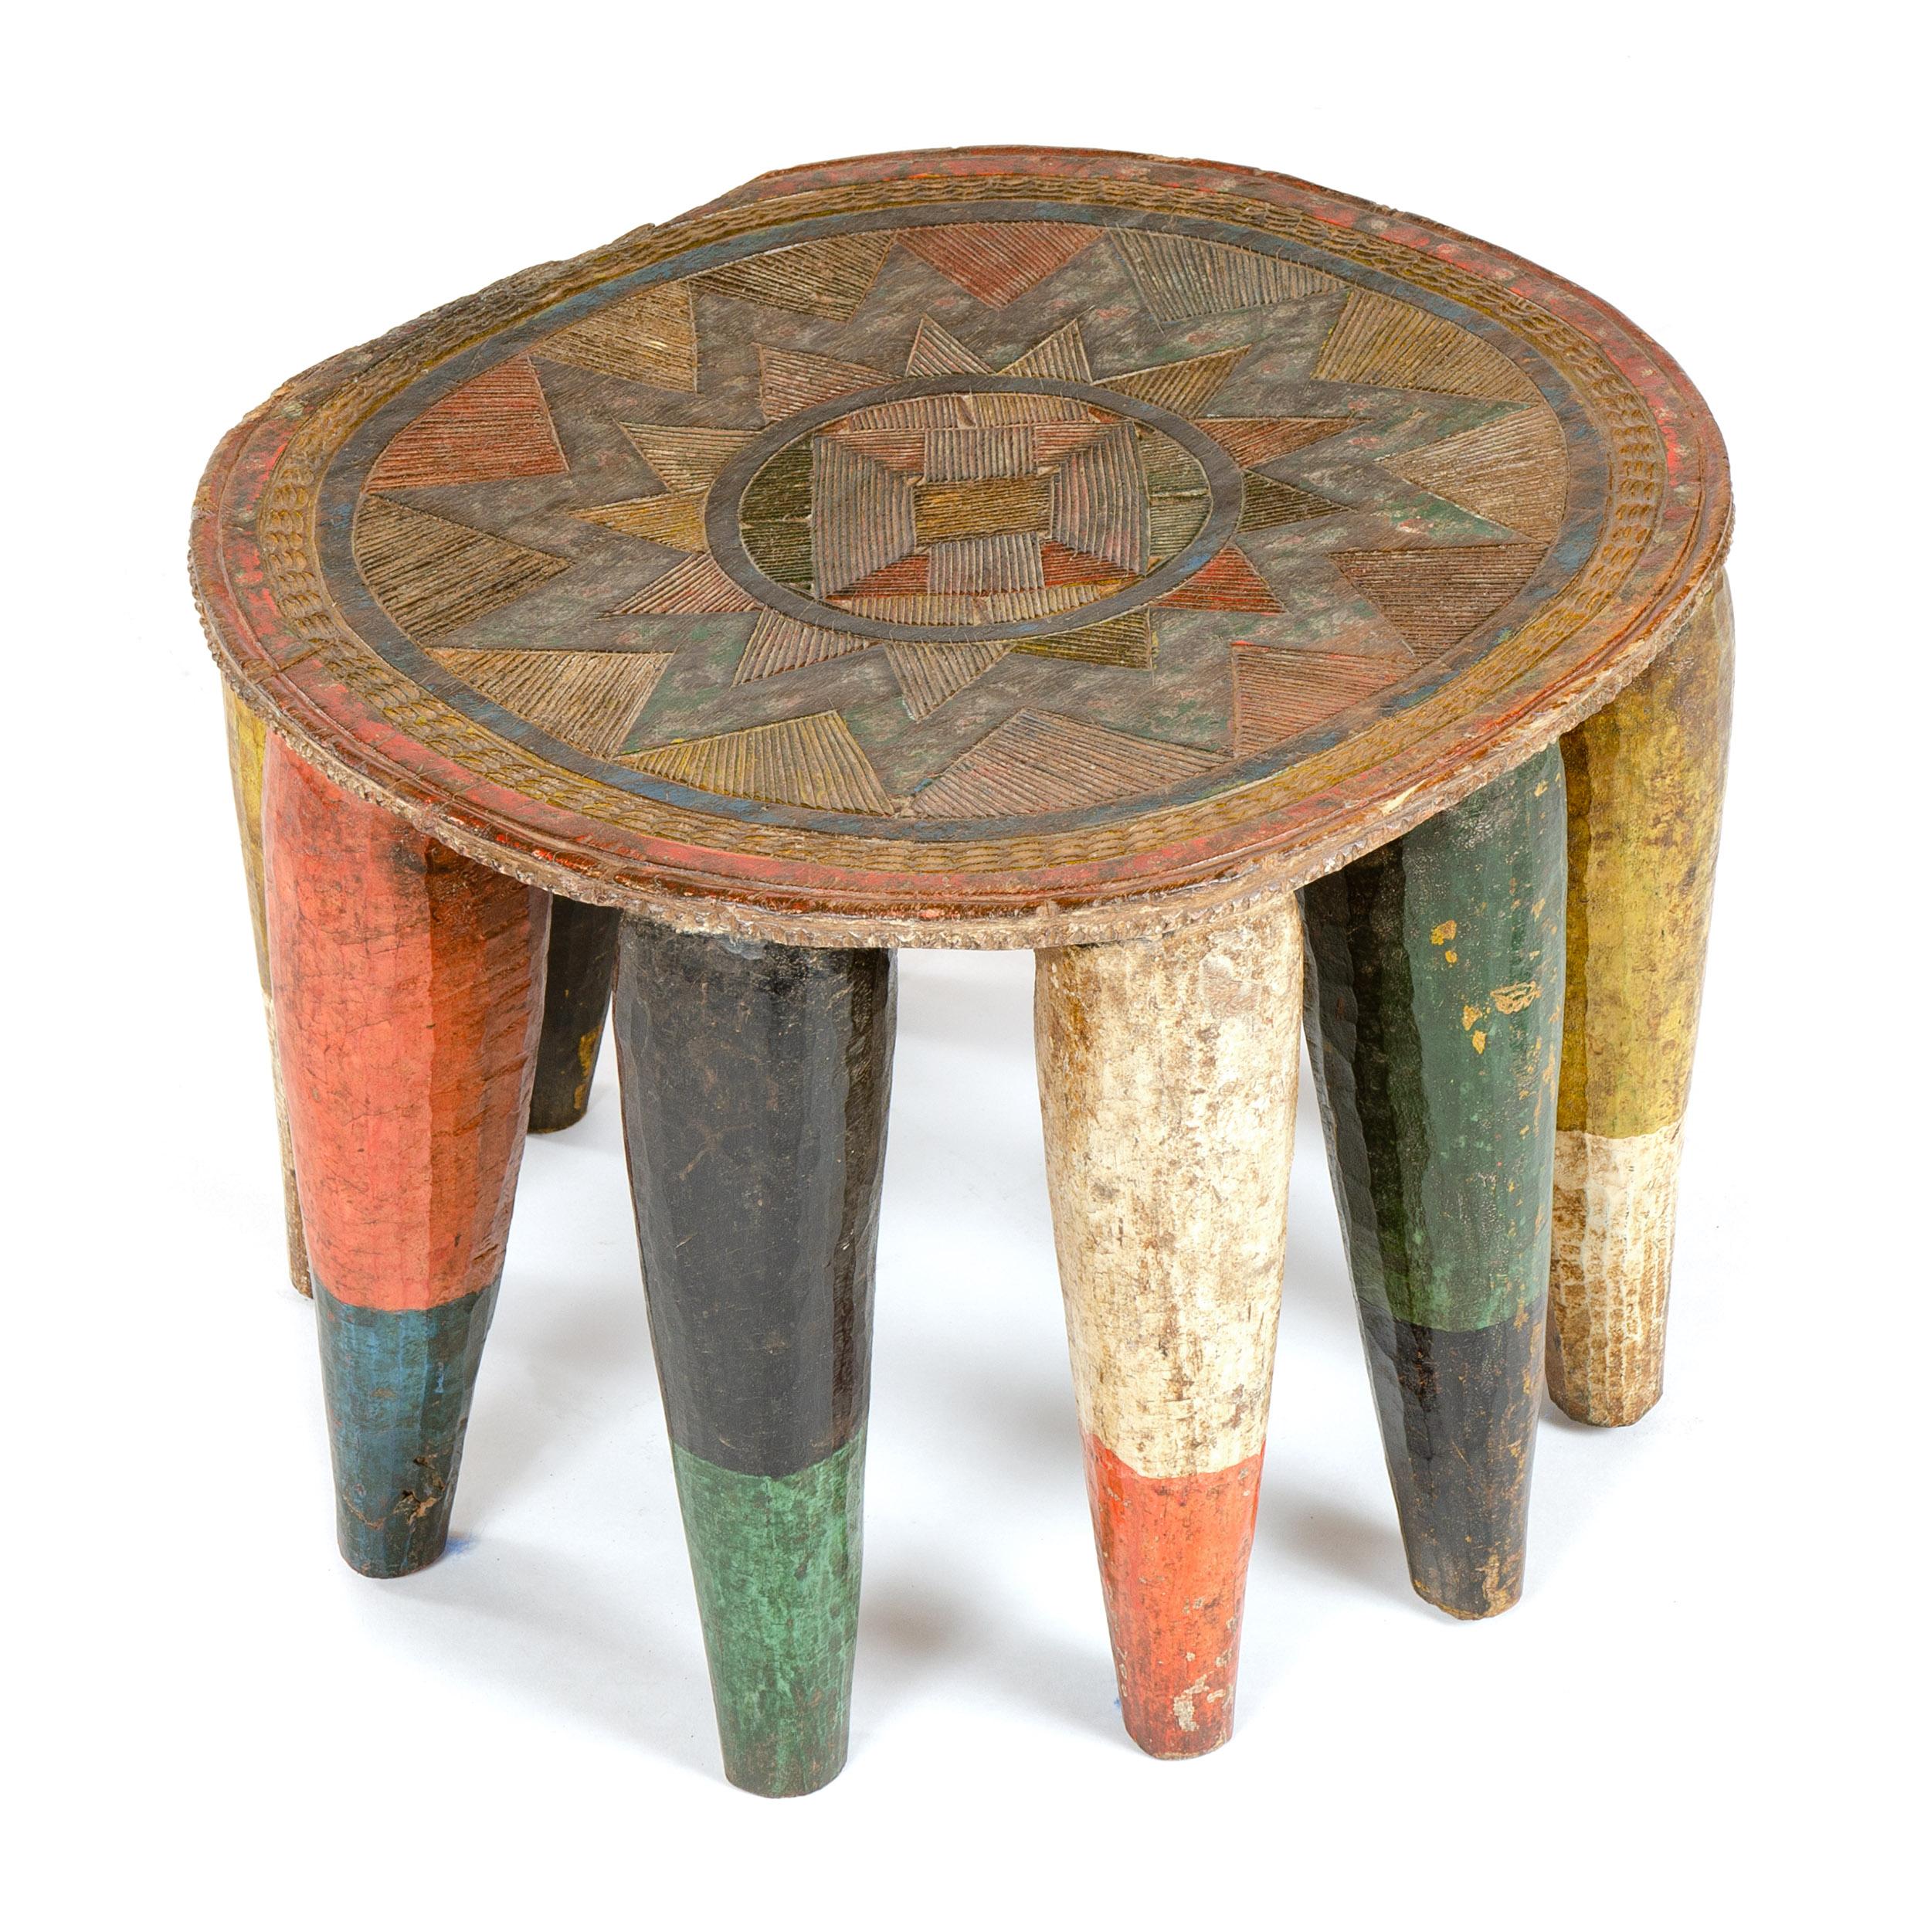 An intricately carved twelve legged stool from the Nupe tribe of Nigeria.